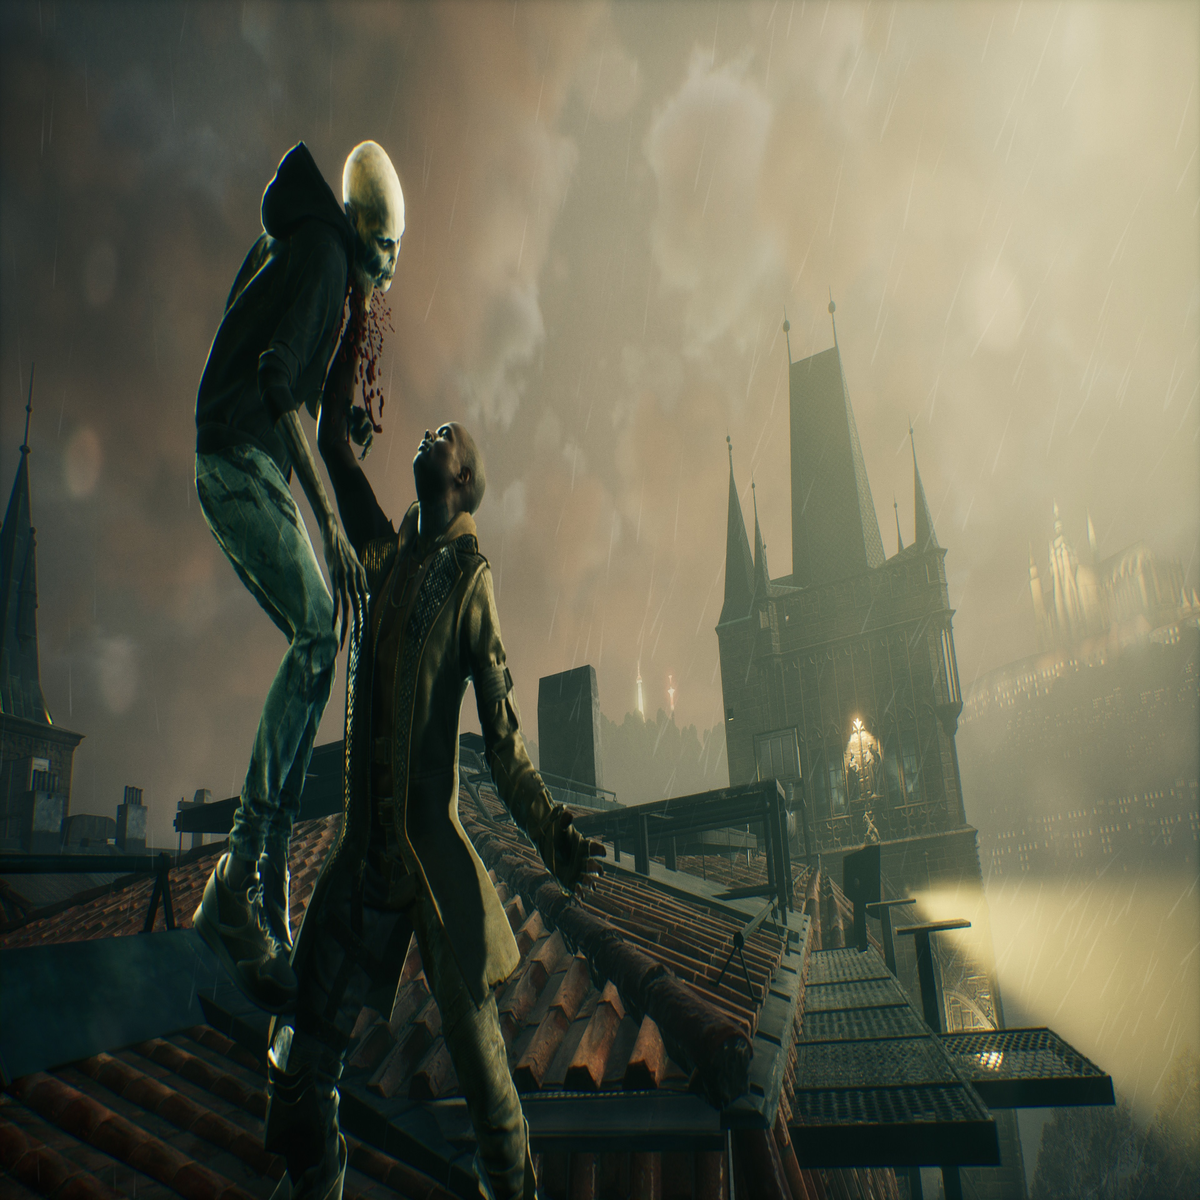 They were tired of America”: Why ex-Division devs chose Prague for Vampire  Bloodhunt's classy backdrop